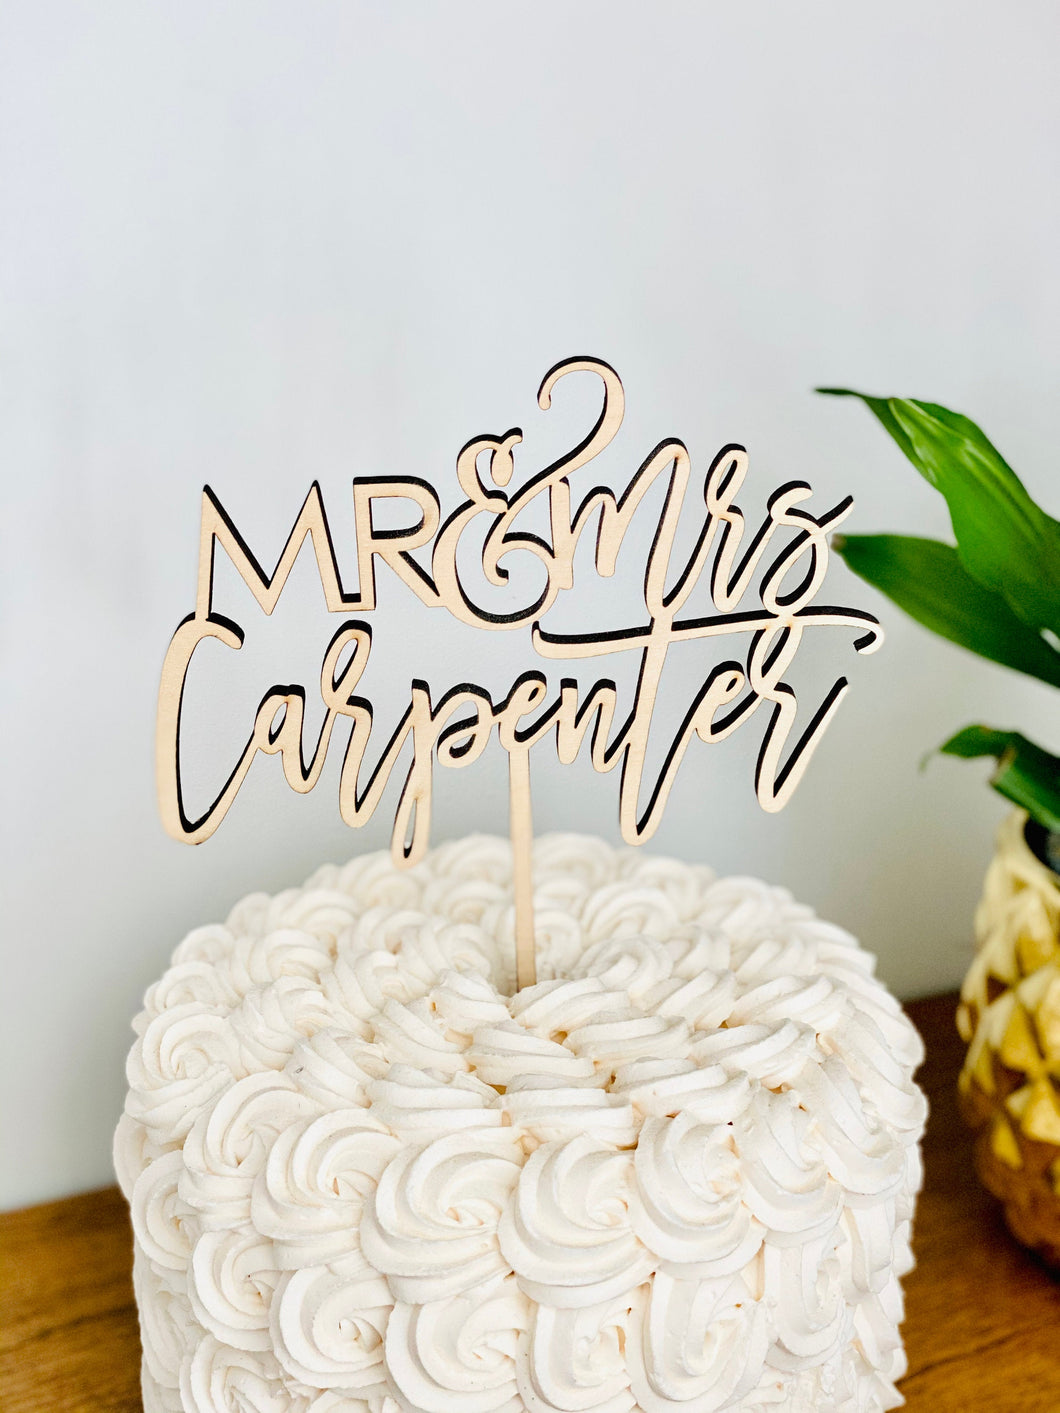 Personalized Mr & Mrs Last Name Cake Topper, 6”W (Version 3)